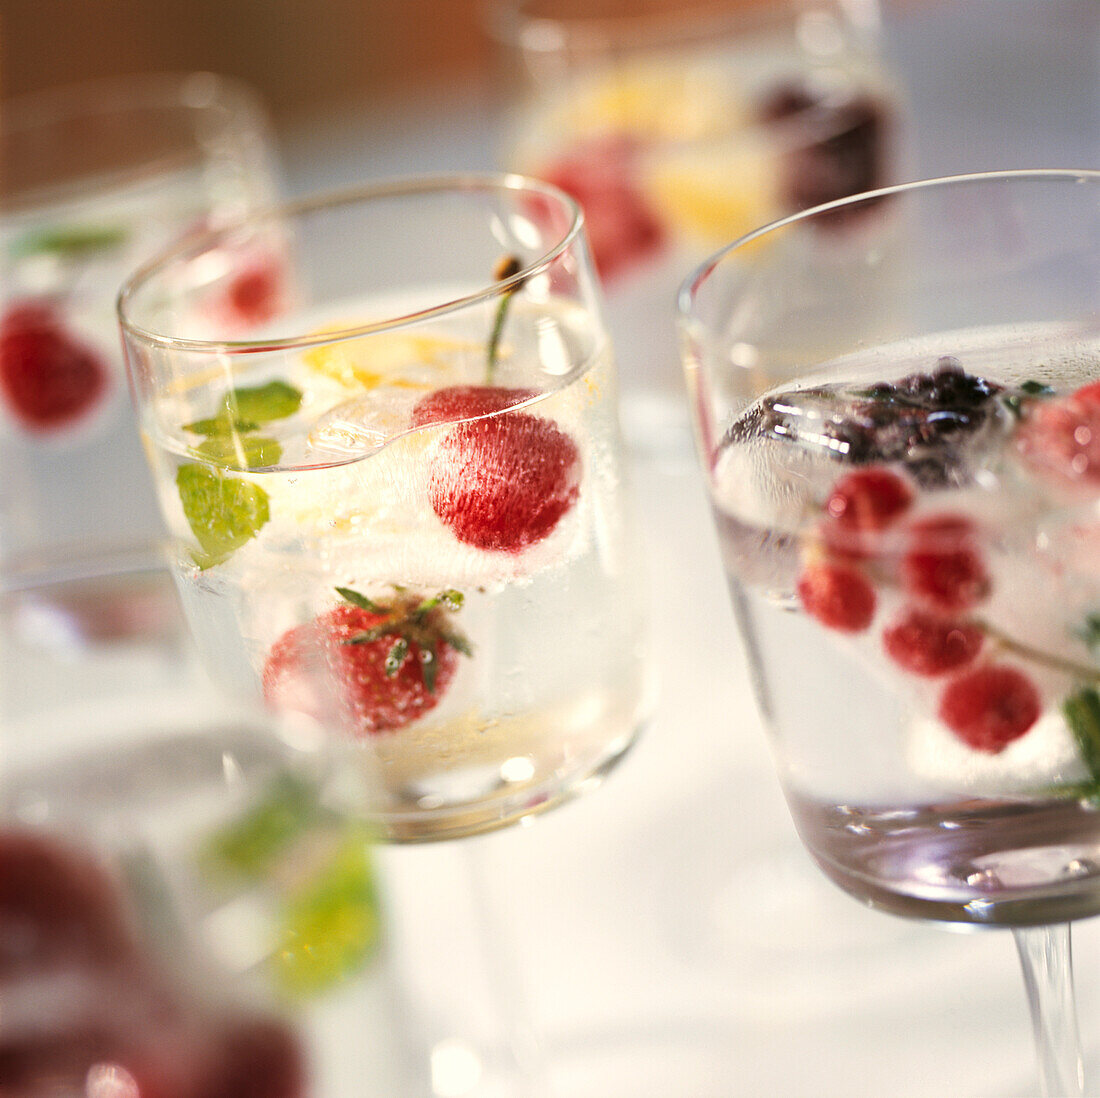 Fruited ice-cubes floating in sparkling mineral water